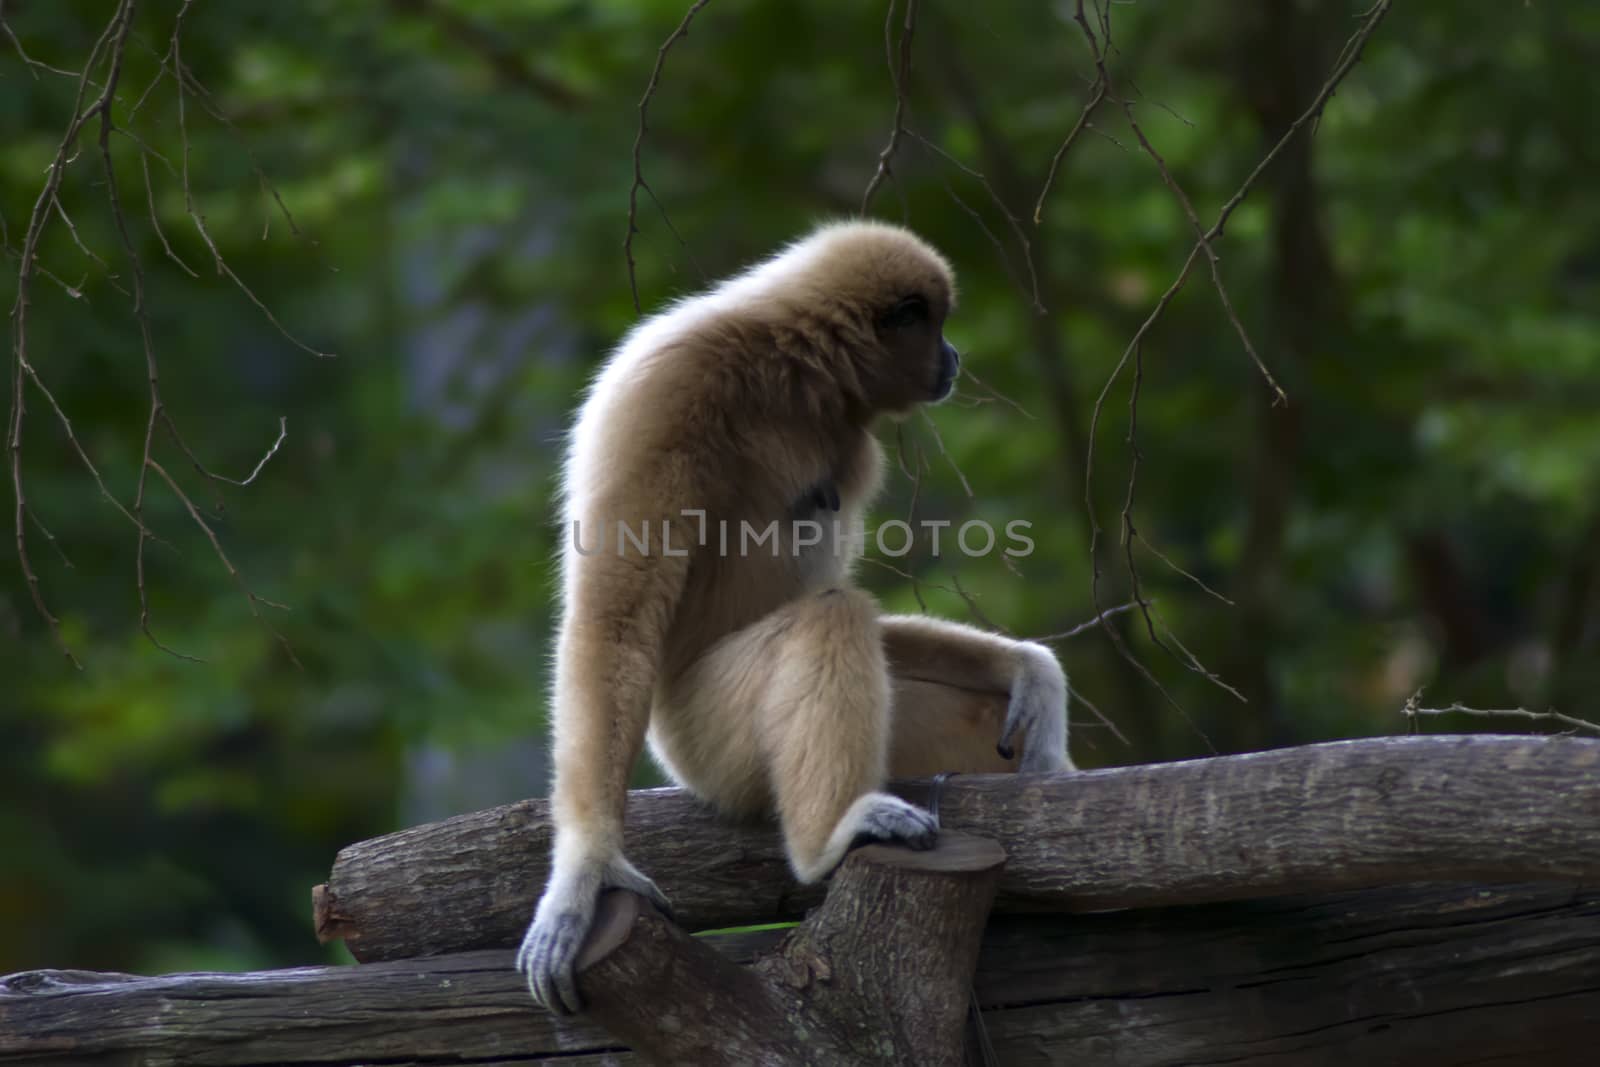 Lar gibbon (Hylobates lar), also known as the white-handed gibbon, is a primate in the gibbon family, Hylobatidae.